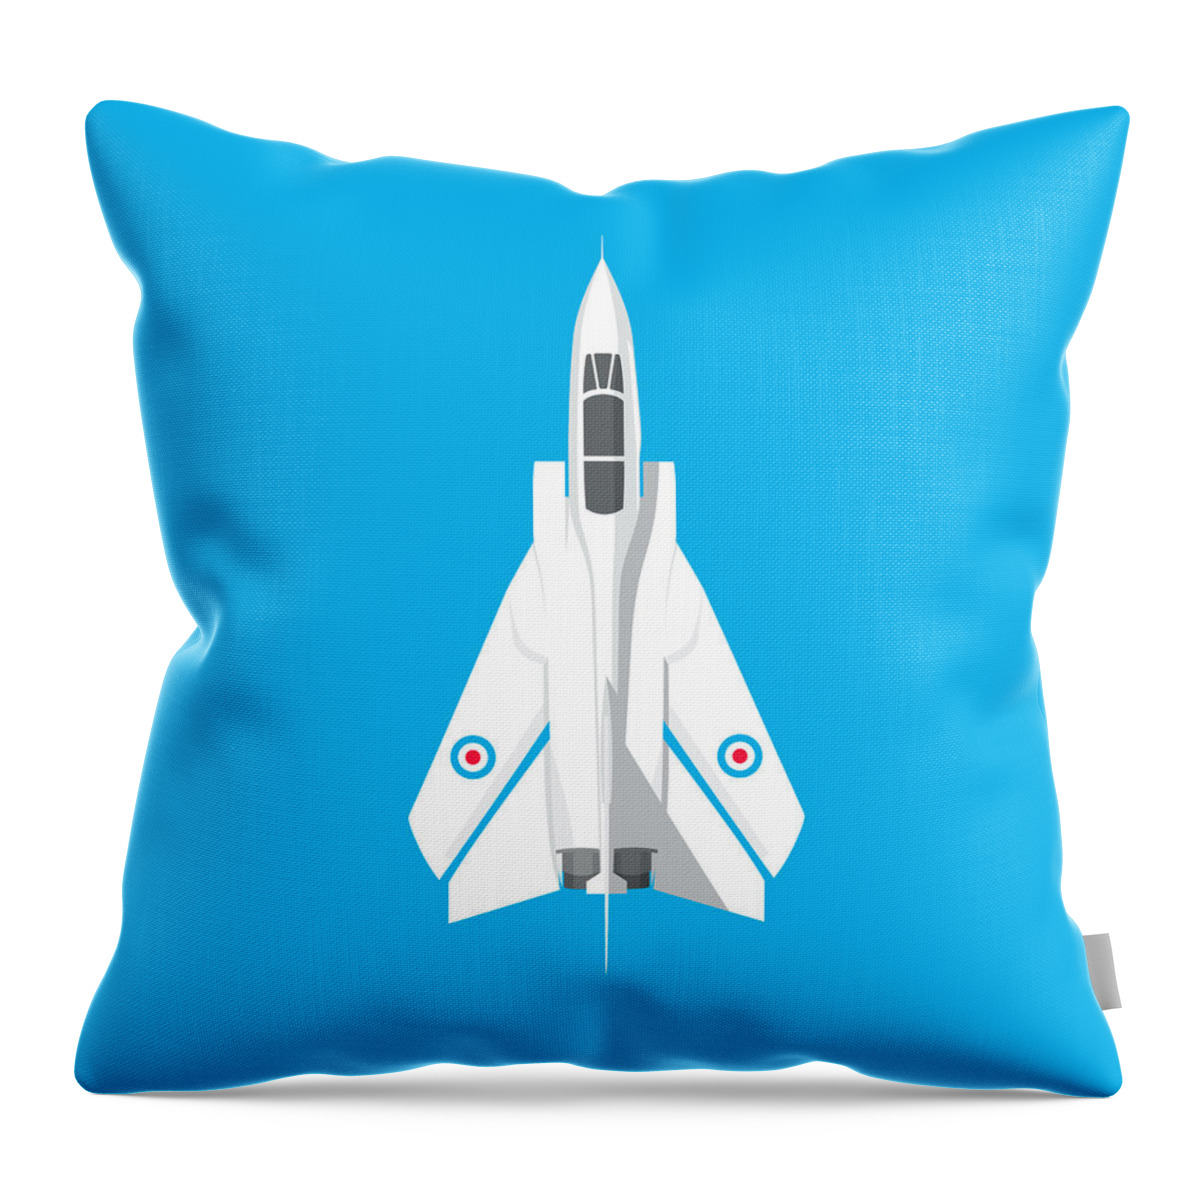 Aircraft Throw Pillow featuring the digital art Tornado Swing Wing Jet - Cyan by Organic Synthesis